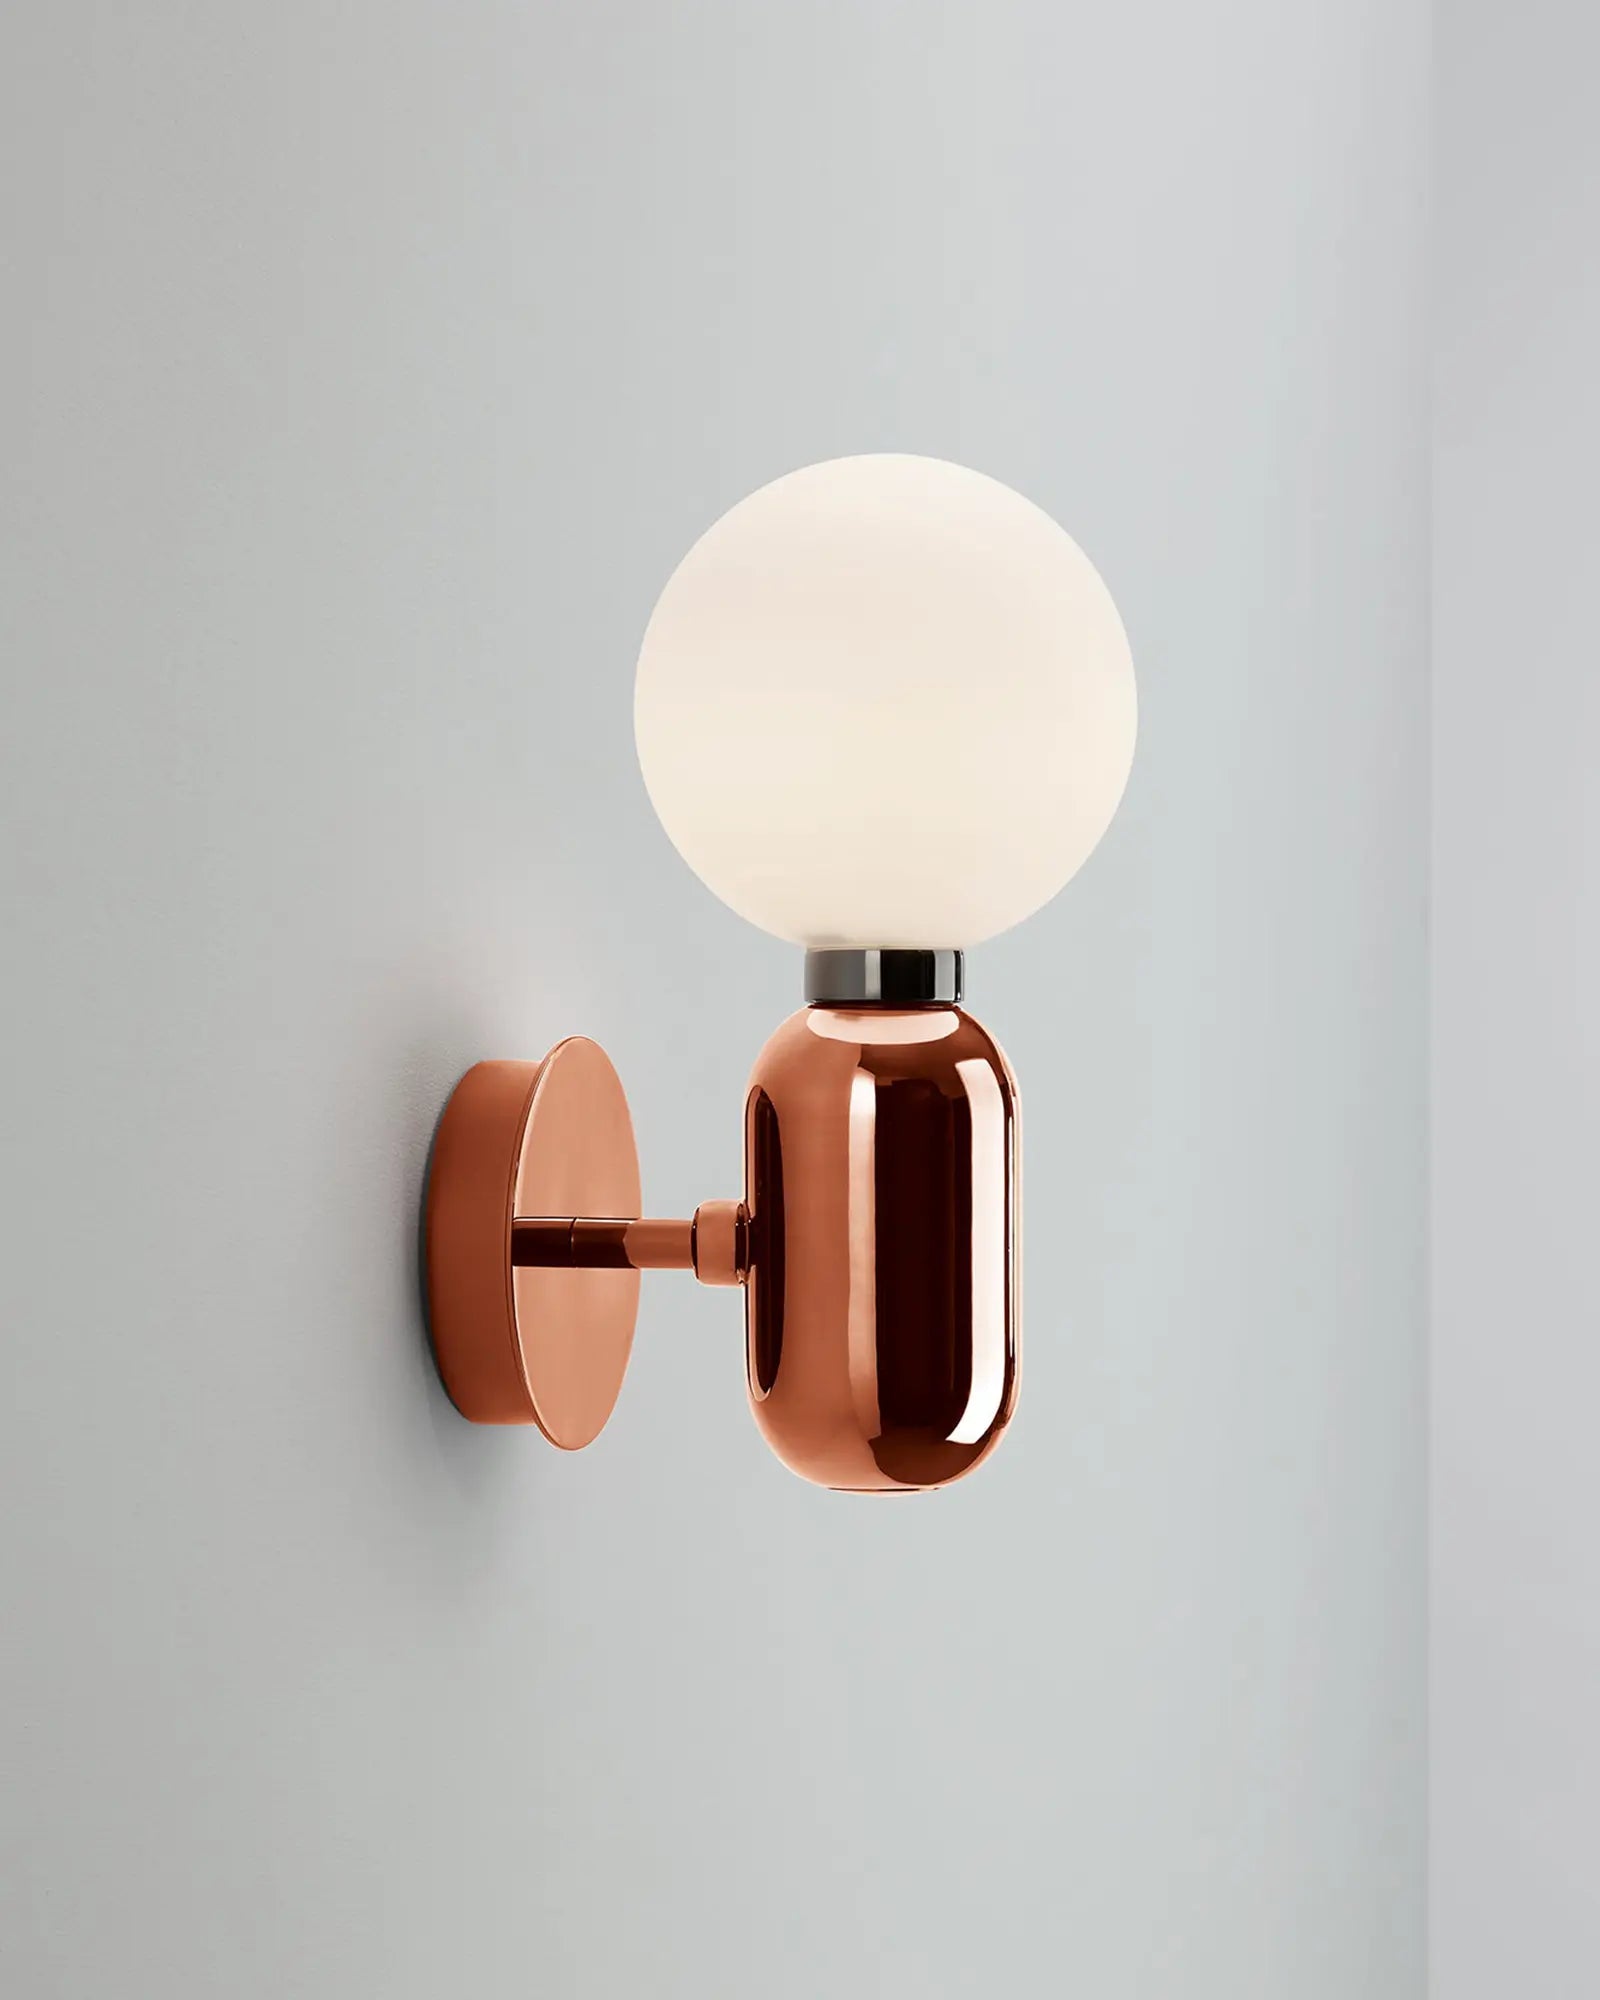 Aballs ceramic and blown glass orb wall light